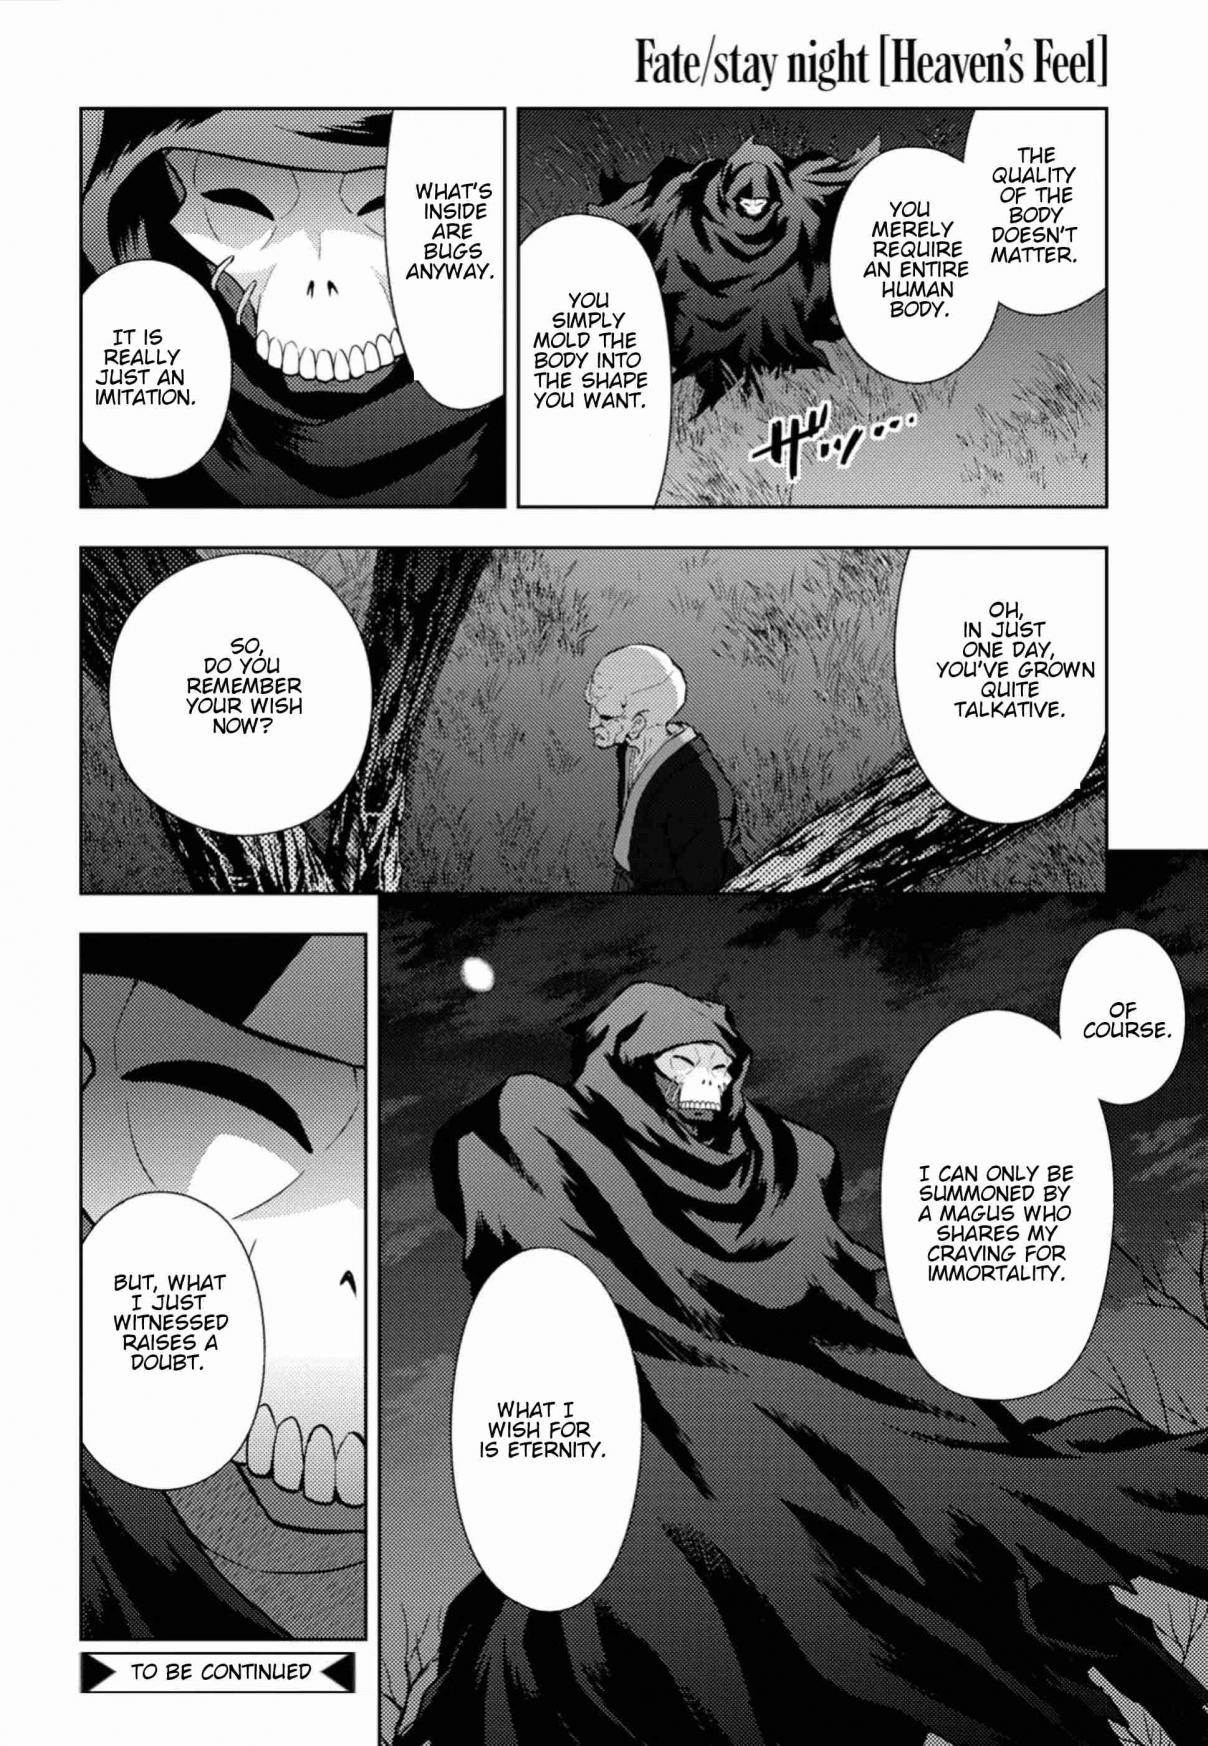 Fate/stay night: Heaven's Feel Vol. 8 Ch. 46 Day 7 / Madness (1)